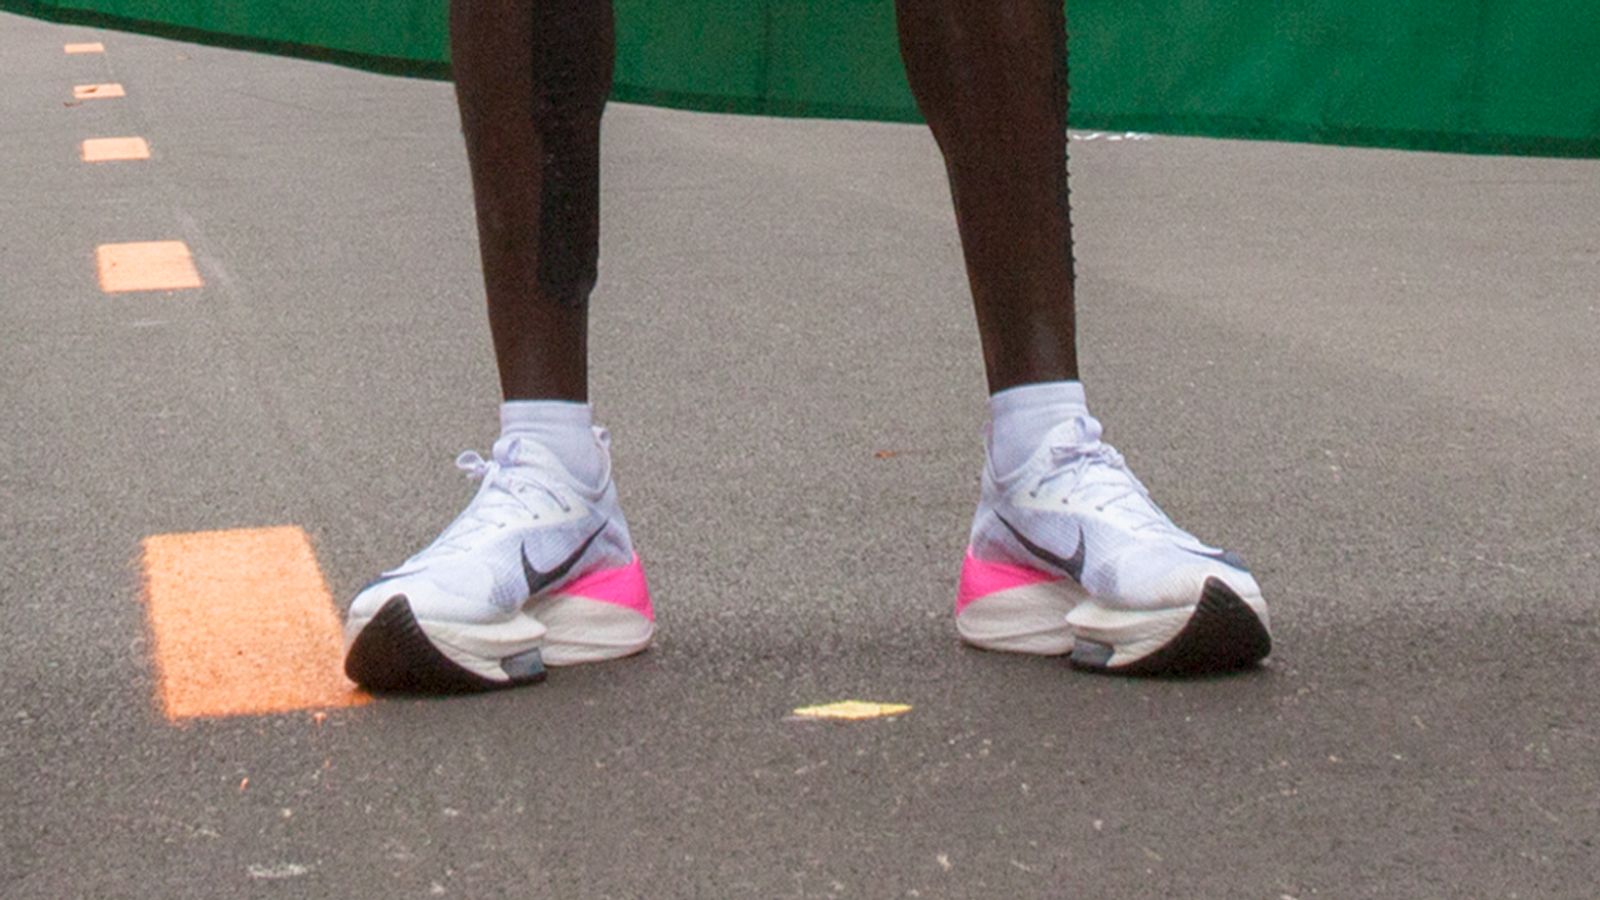 World new rules running shoes | Athletics News | Sky Sports